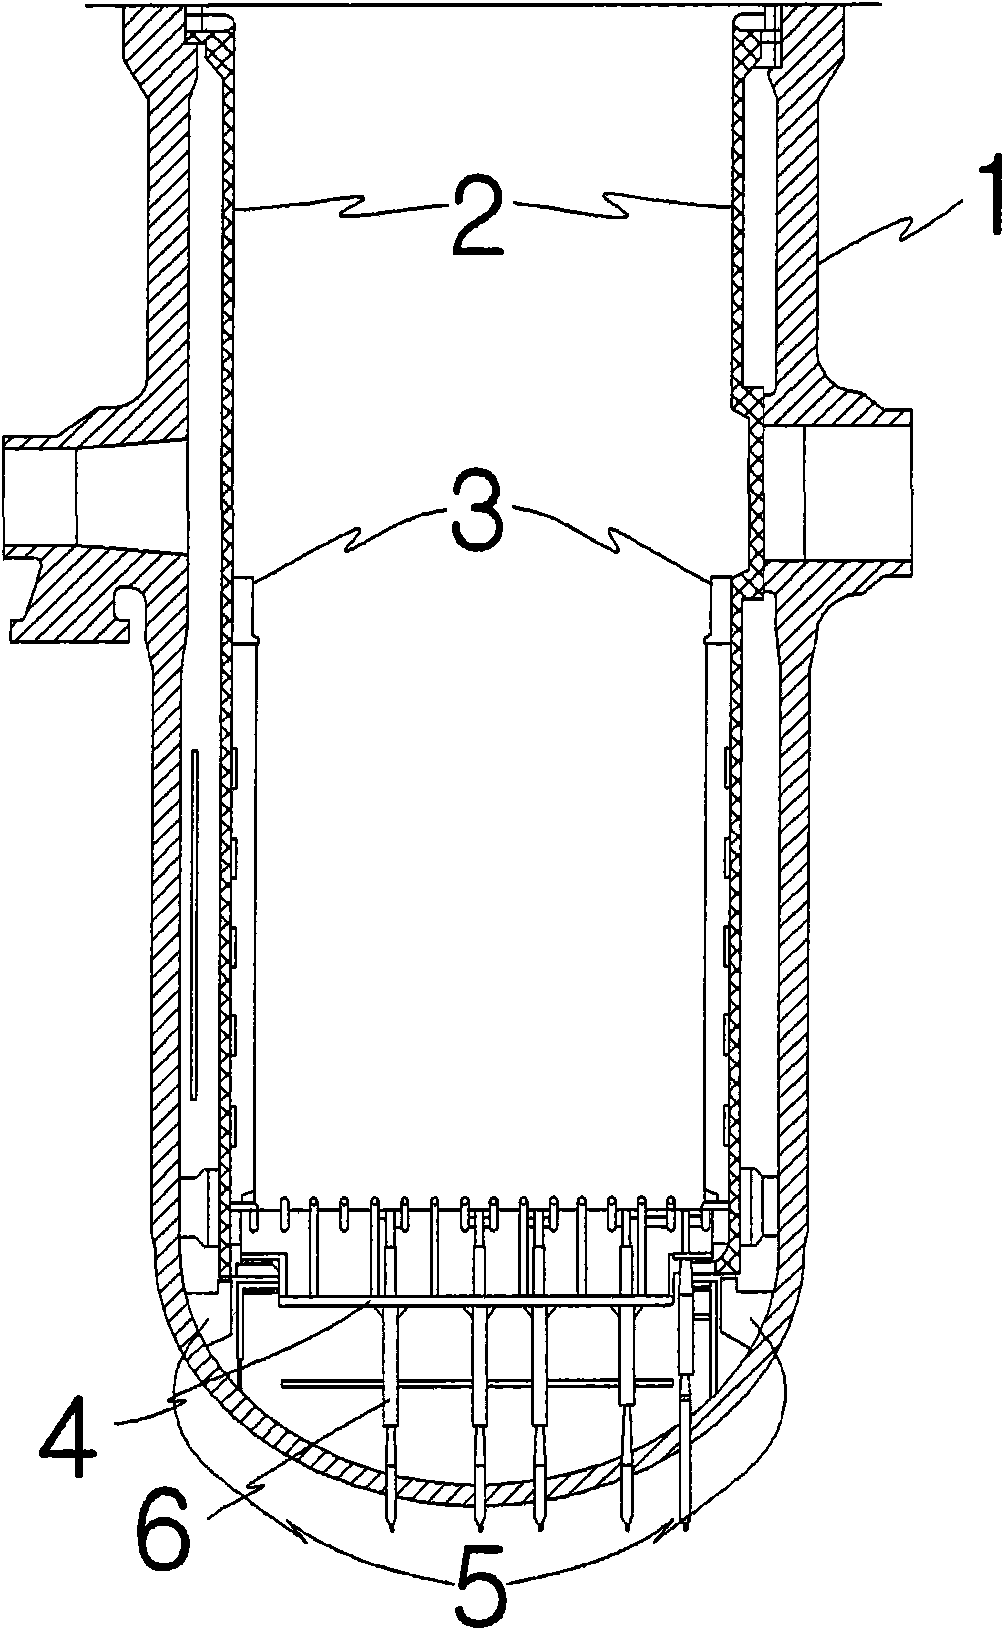 Apparatus and method for automatically and remotely measuring the internal gap of a reactor